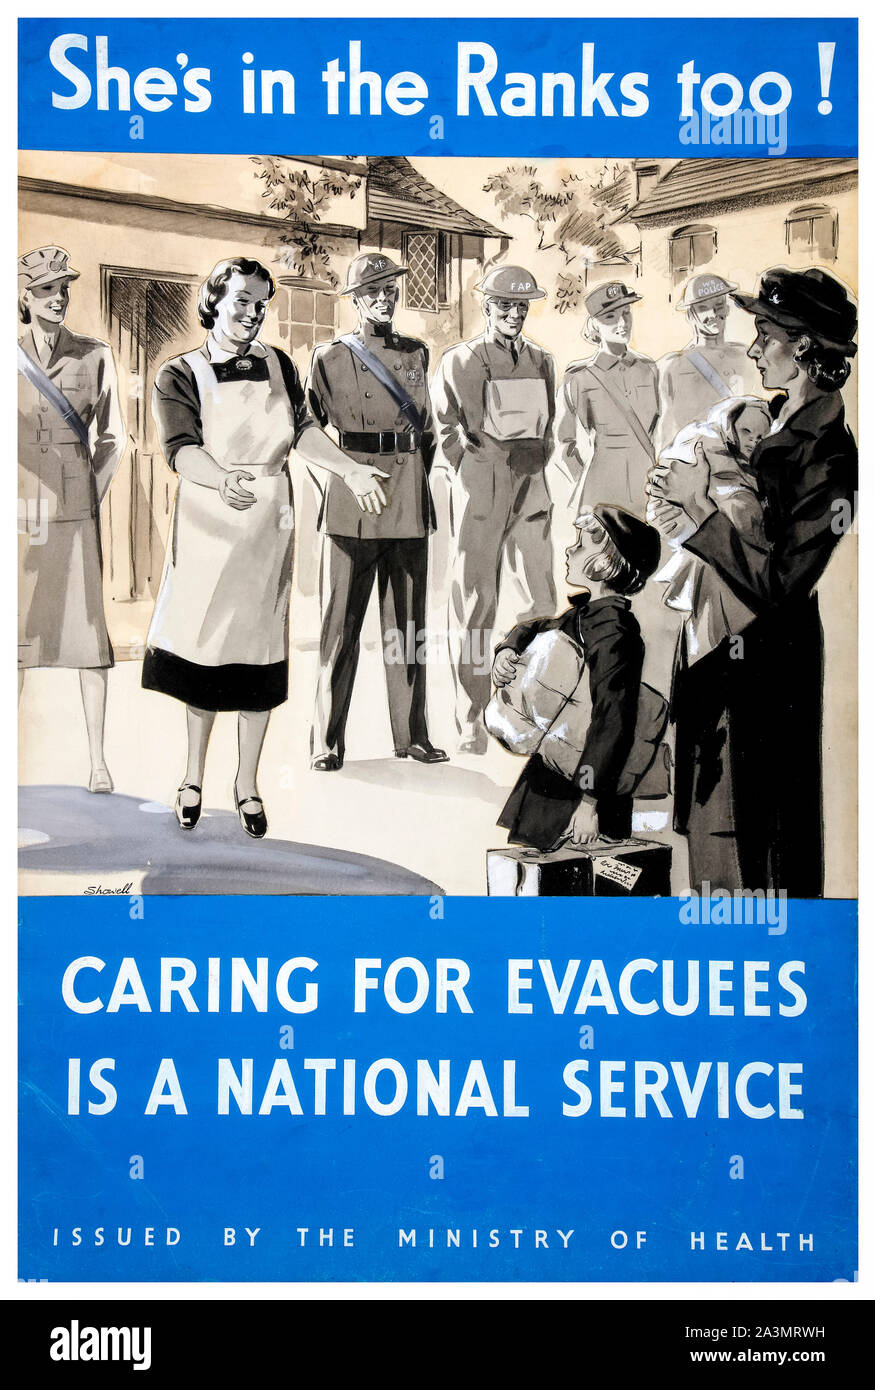 British, WW2, Evacuation of Children poster, She's in the Ranks too!, Caring for evacuees is a national service, (foster carer figure among soldiers), 1939-1946 Stock Photo